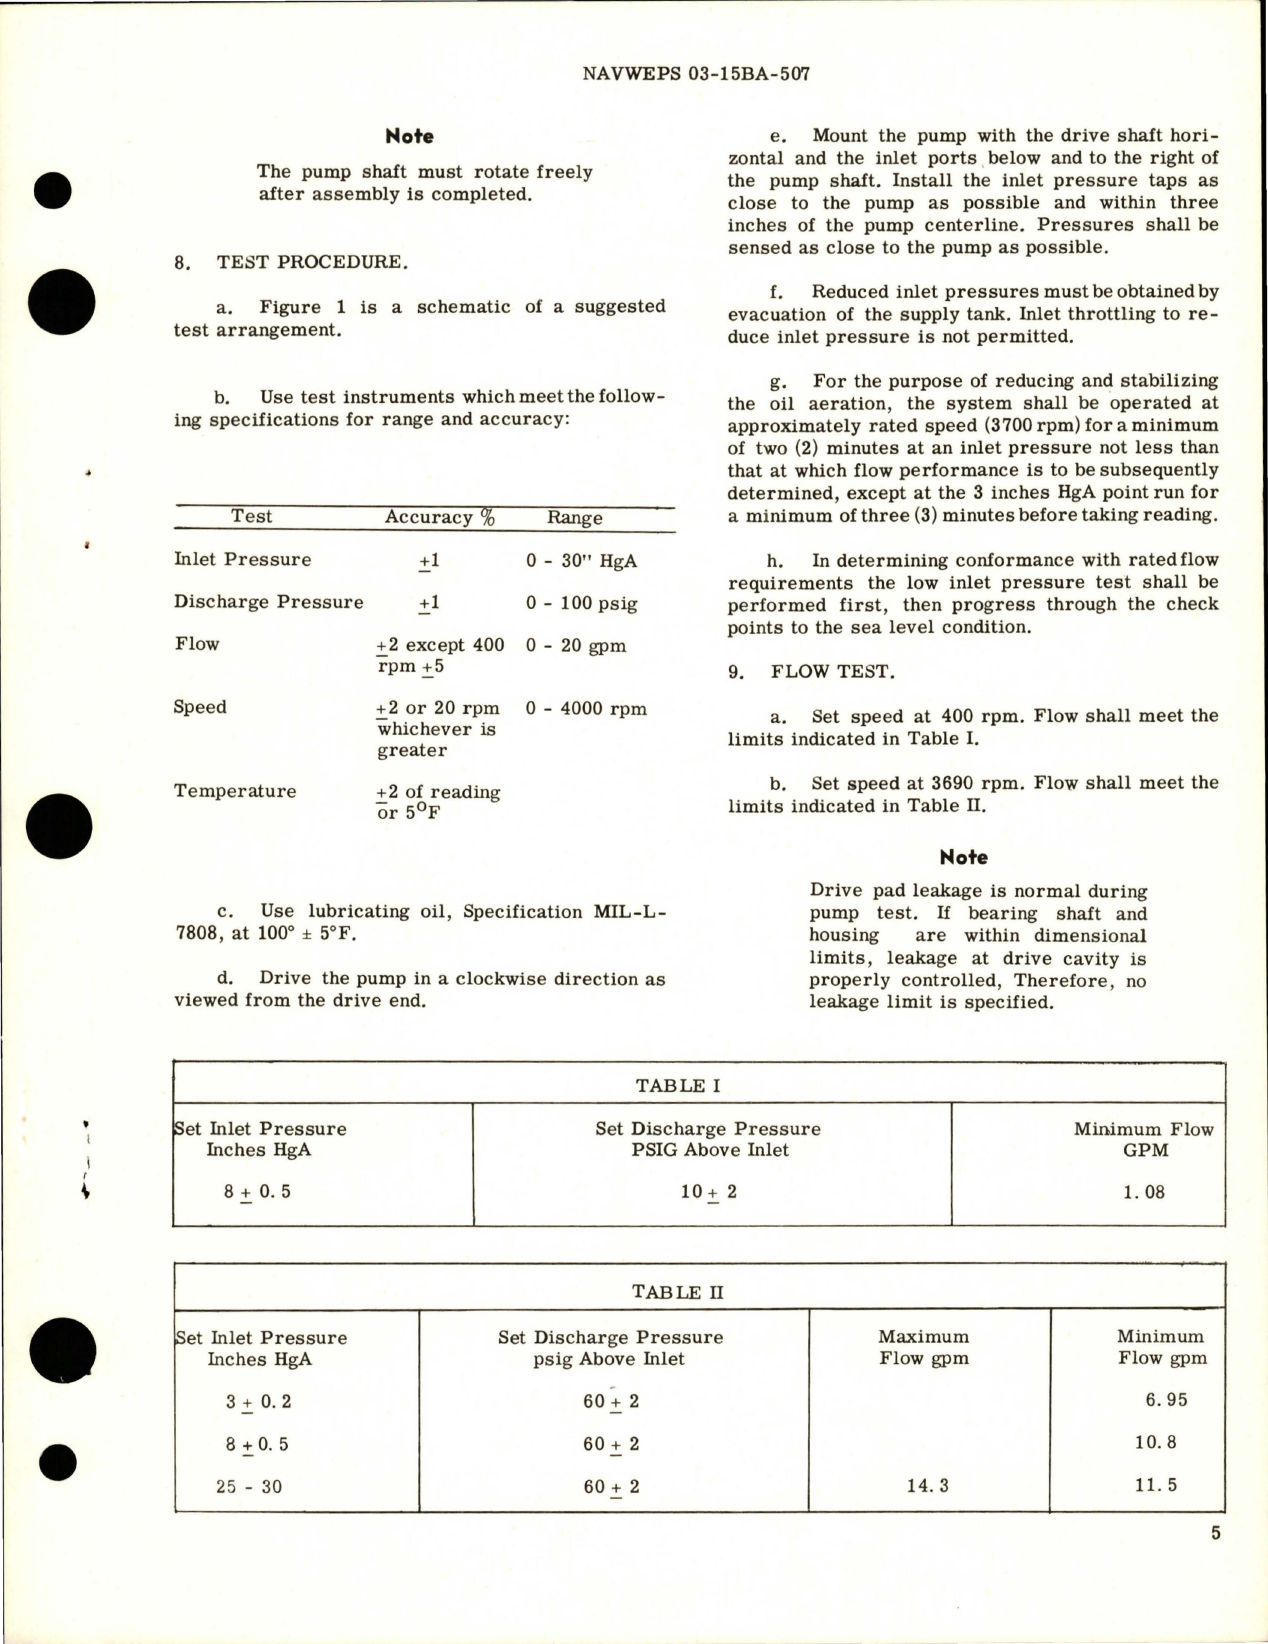 Sample page 5 from AirCorps Library document: Overhaul Instructions with Parts Breakdown for Scavenge Pump 